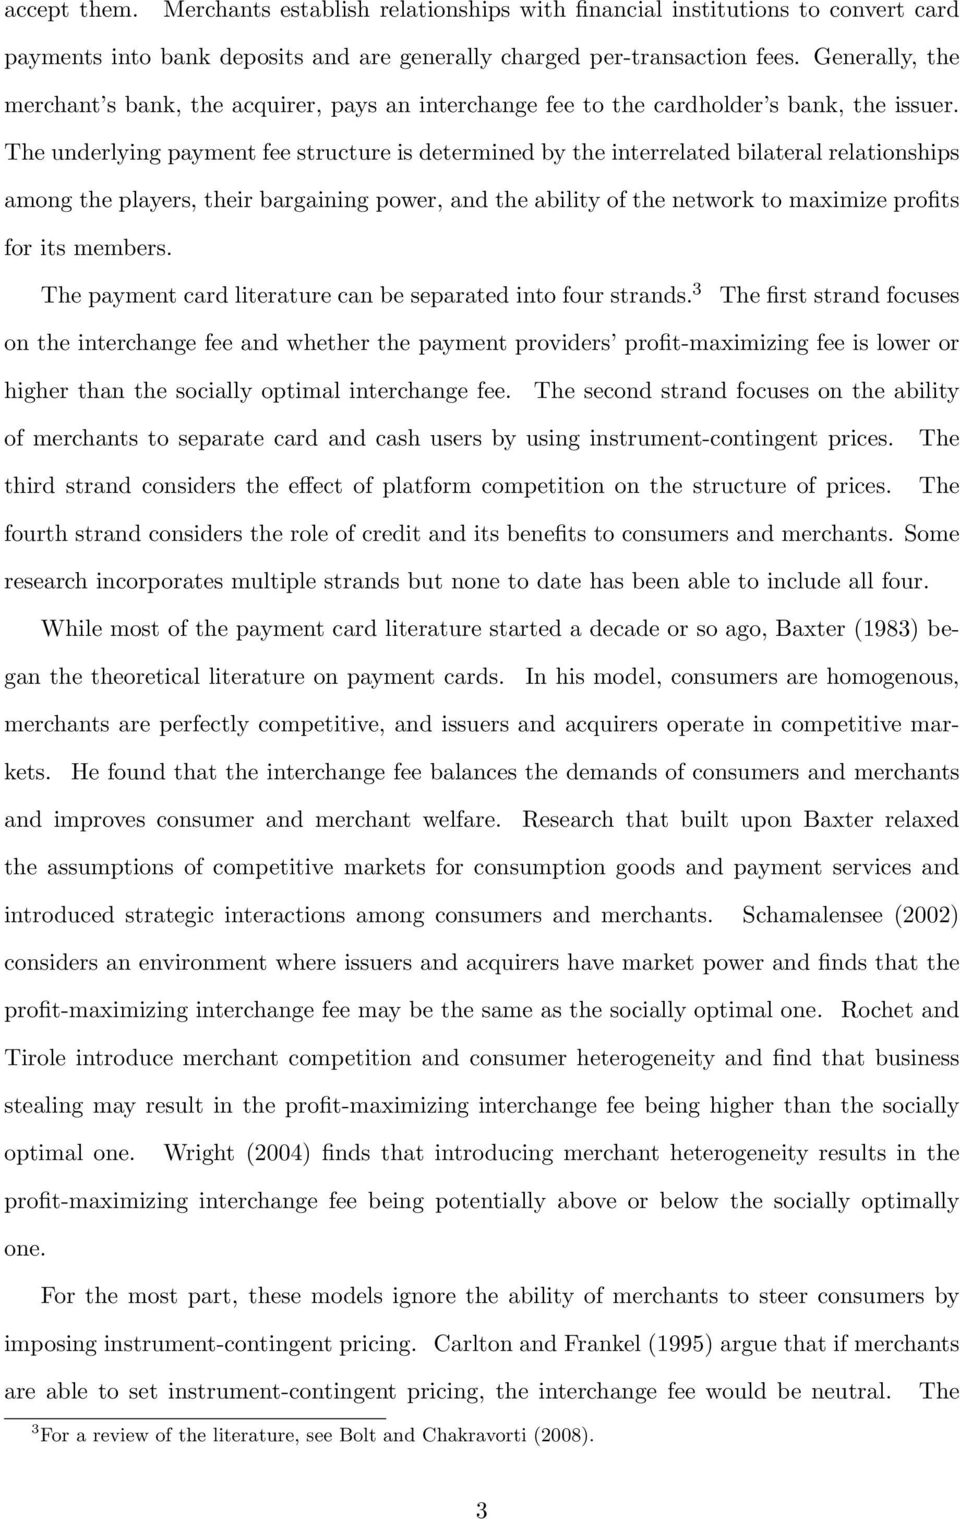 The underlying payment fee structure is determined by the interrelated bilateral relationships among the players, their bargaining power, and the ability of the network to maximize profits for its